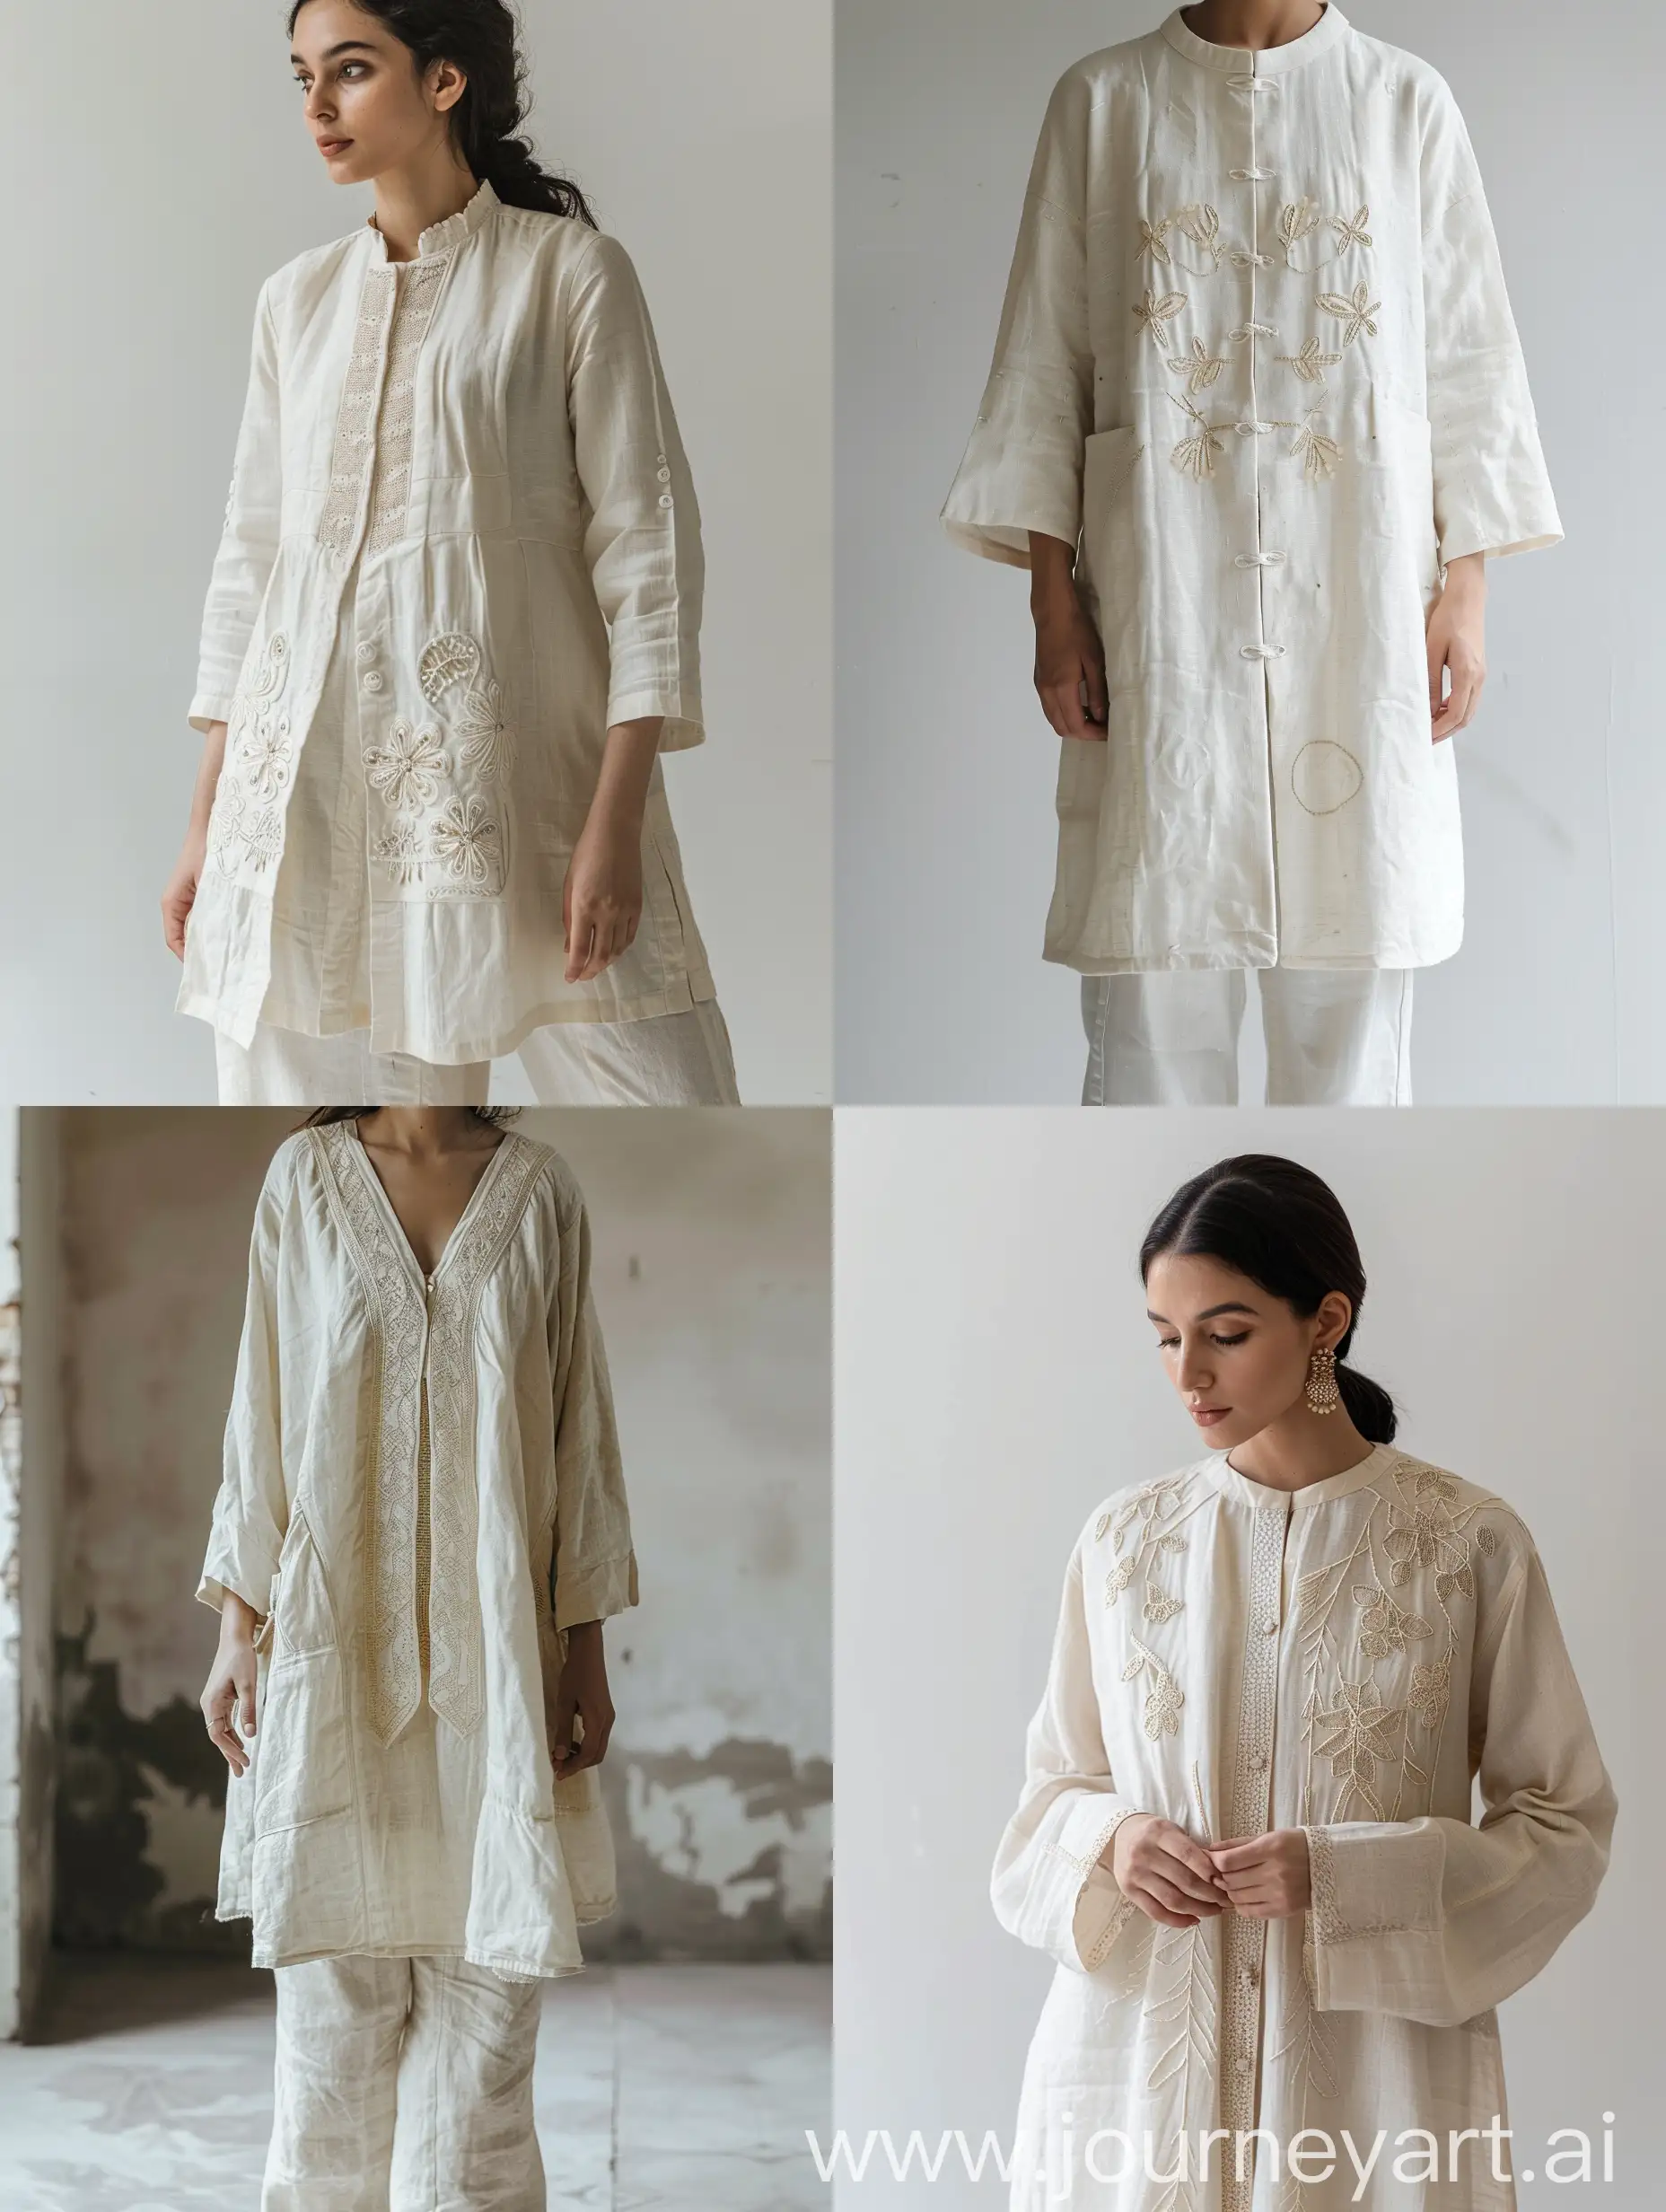 Short coat, linen material, cream color, handmade embroidery, simple and minimal embroidery, with simple pants.